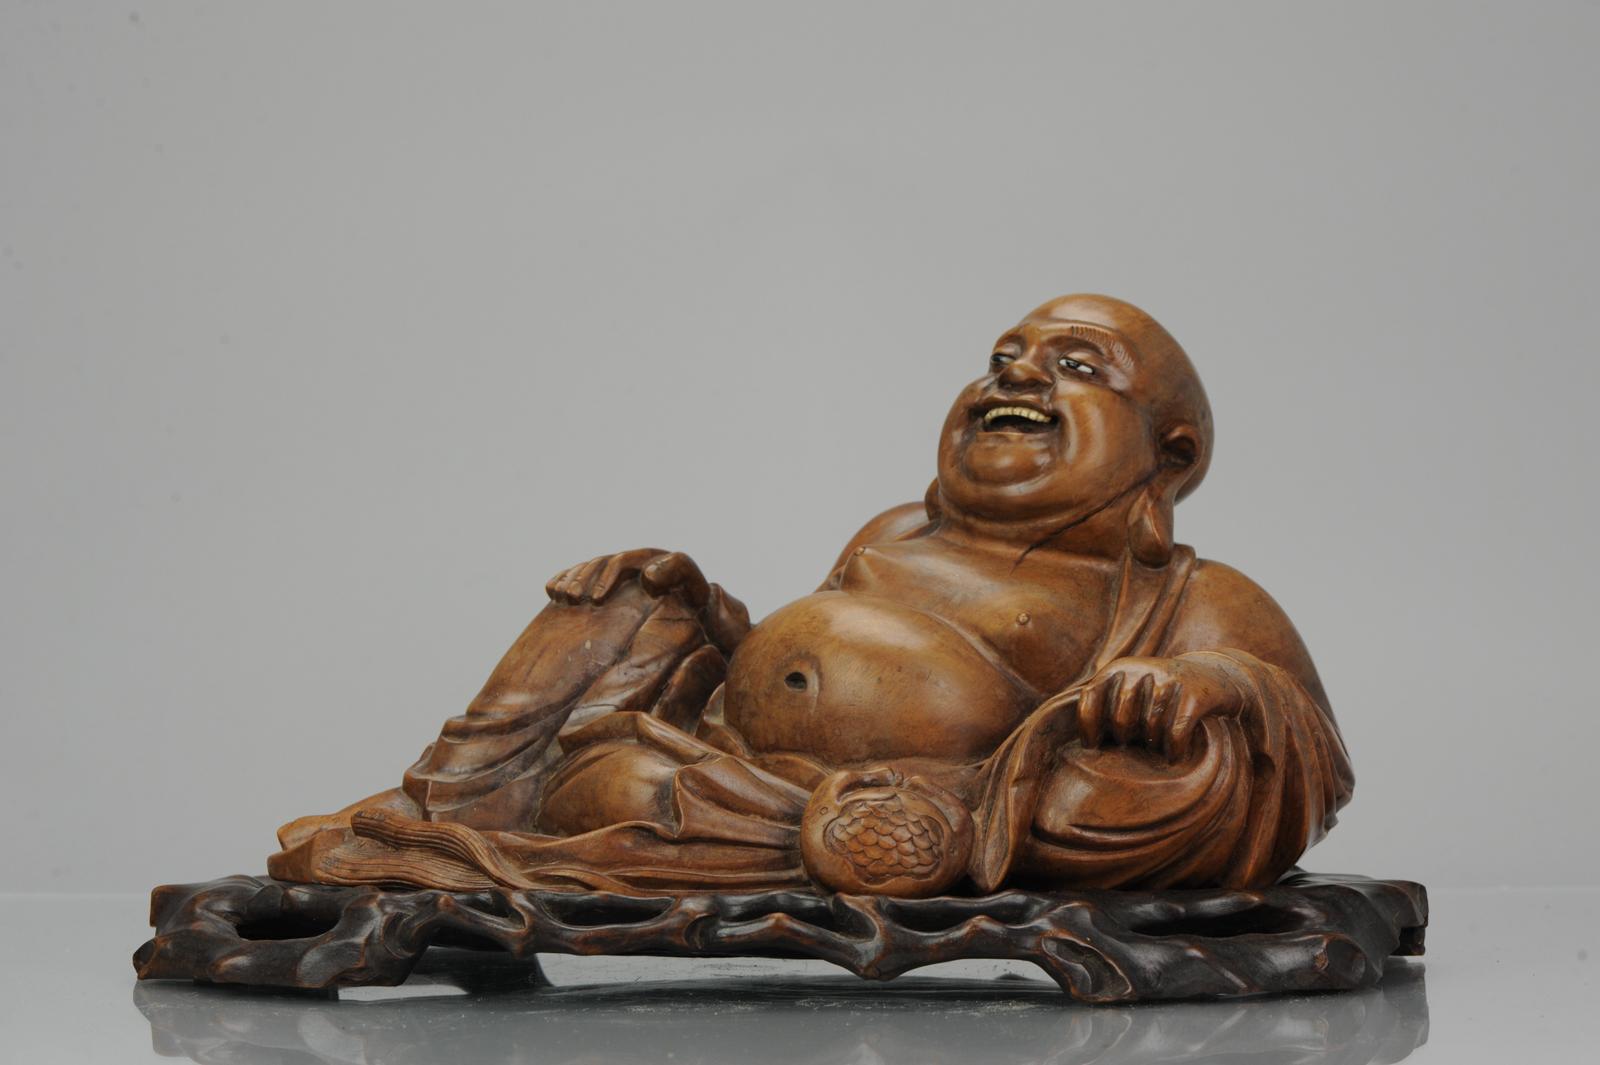 Description
China, finely carved wooden Laughing Buddha in laying position. Seated on a matching stand.

Condition
Some age signs like cracks and 2 or 3 fritspots. Size: 365 mm diameter, 200 mm high, 200 mm depth.

Period
ca 1900.